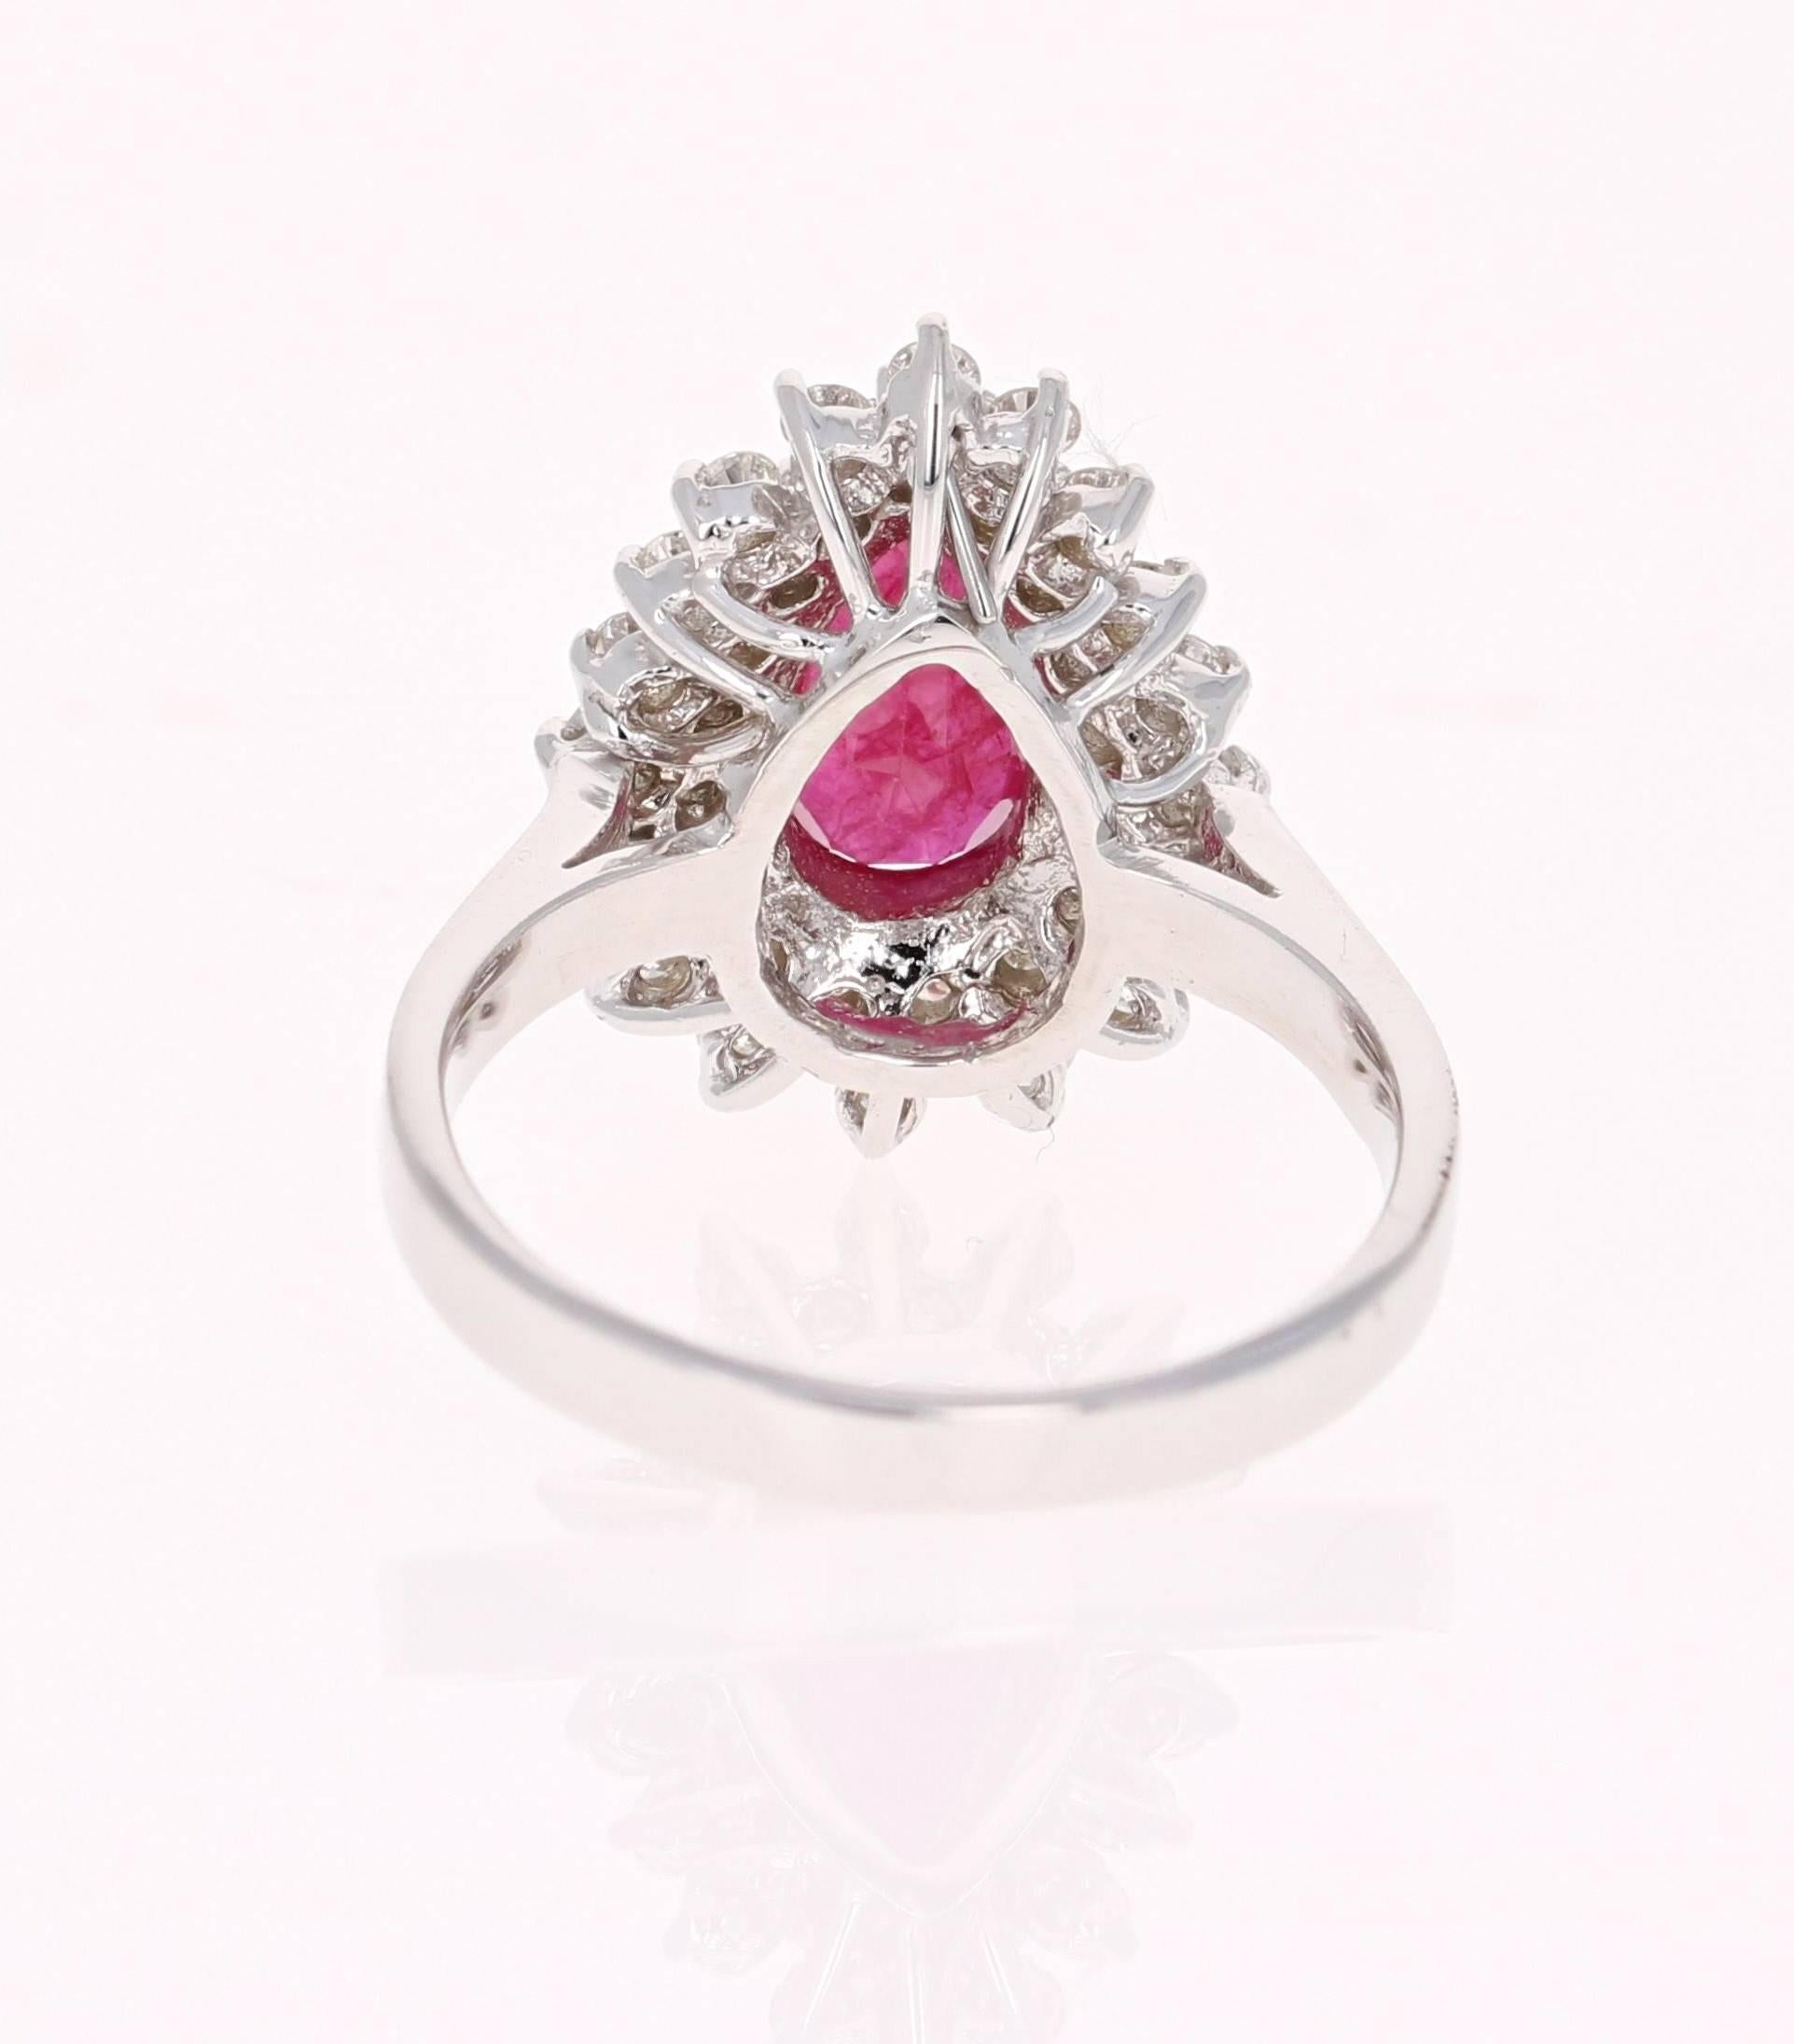 Pear Cut 1.77 Carat Ruby Diamond White Gold Cocktail Ring